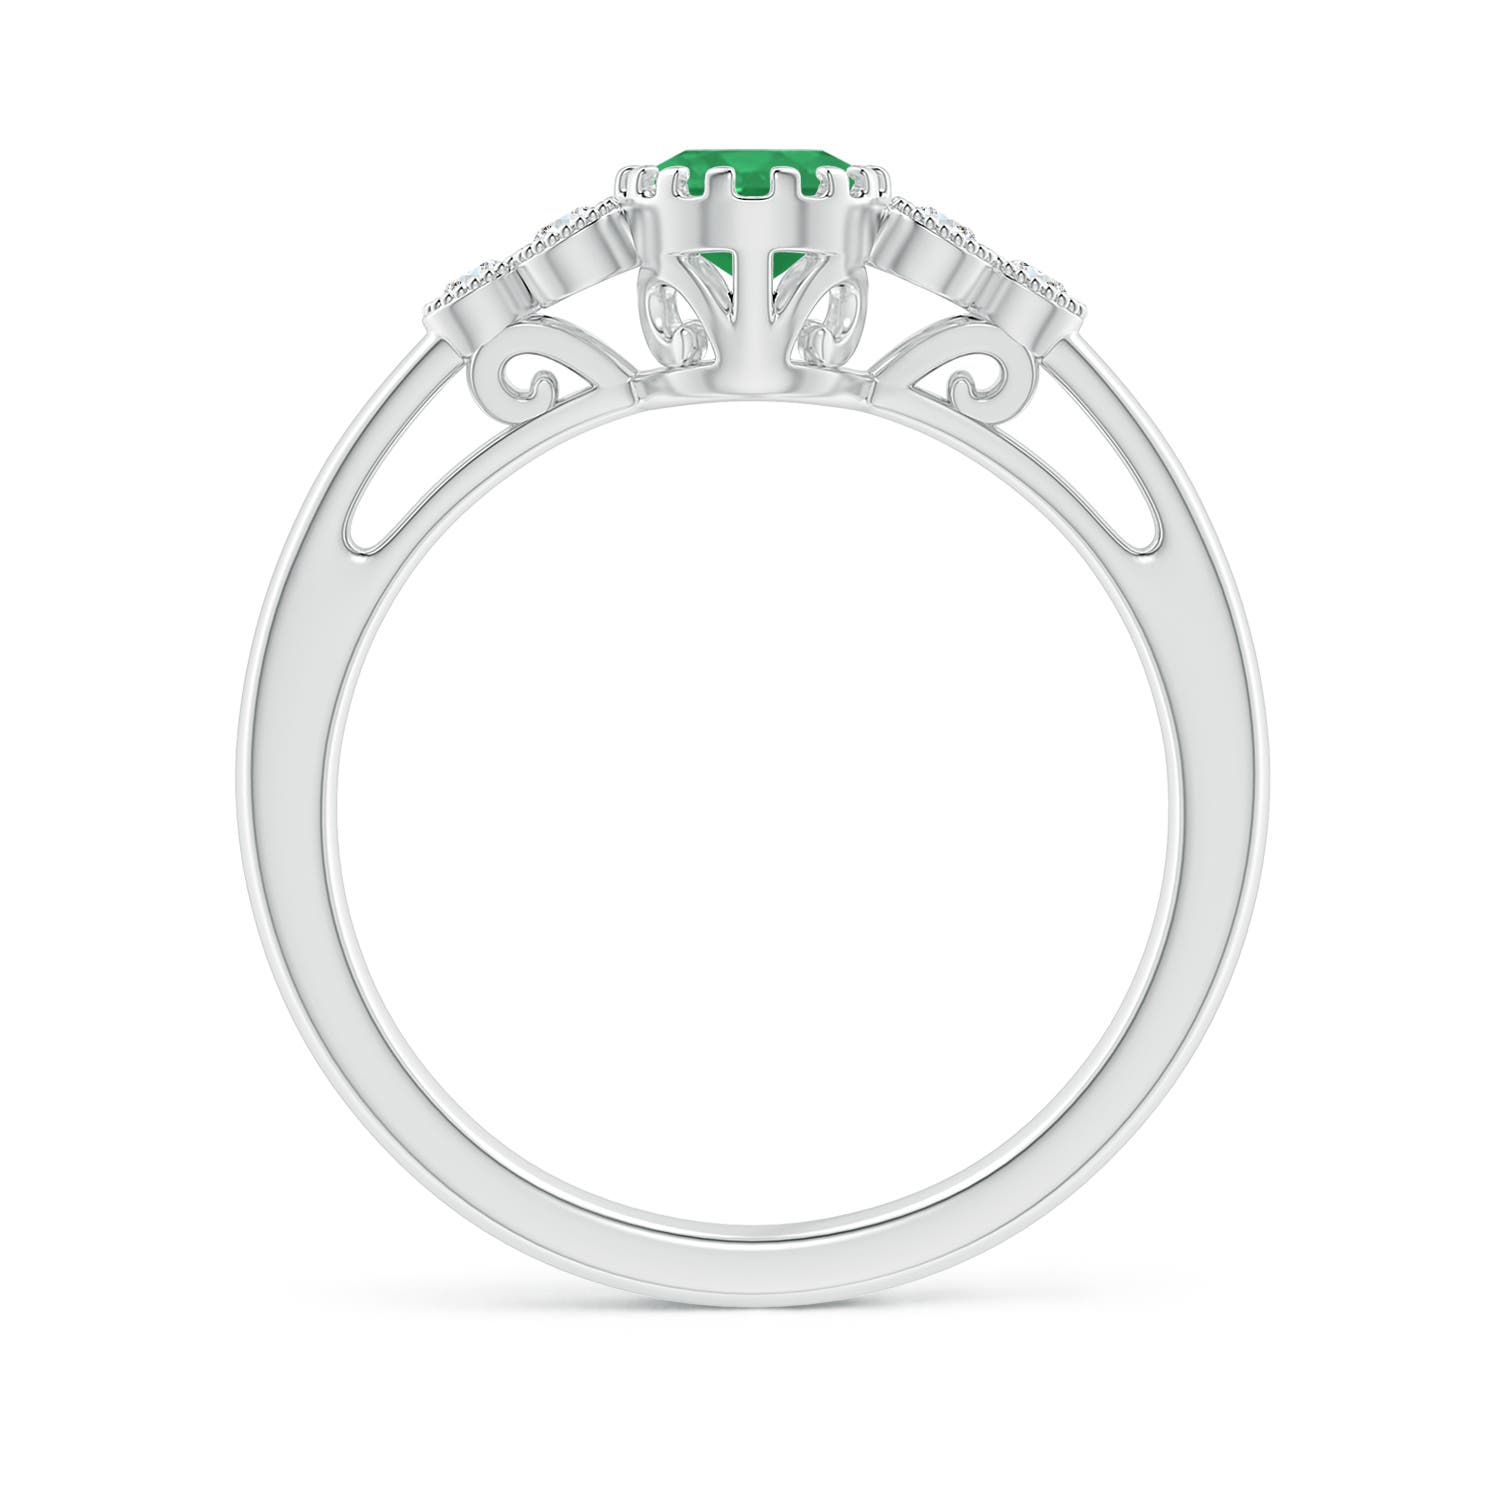 A - Emerald / 0.8 CT / 14 KT White Gold